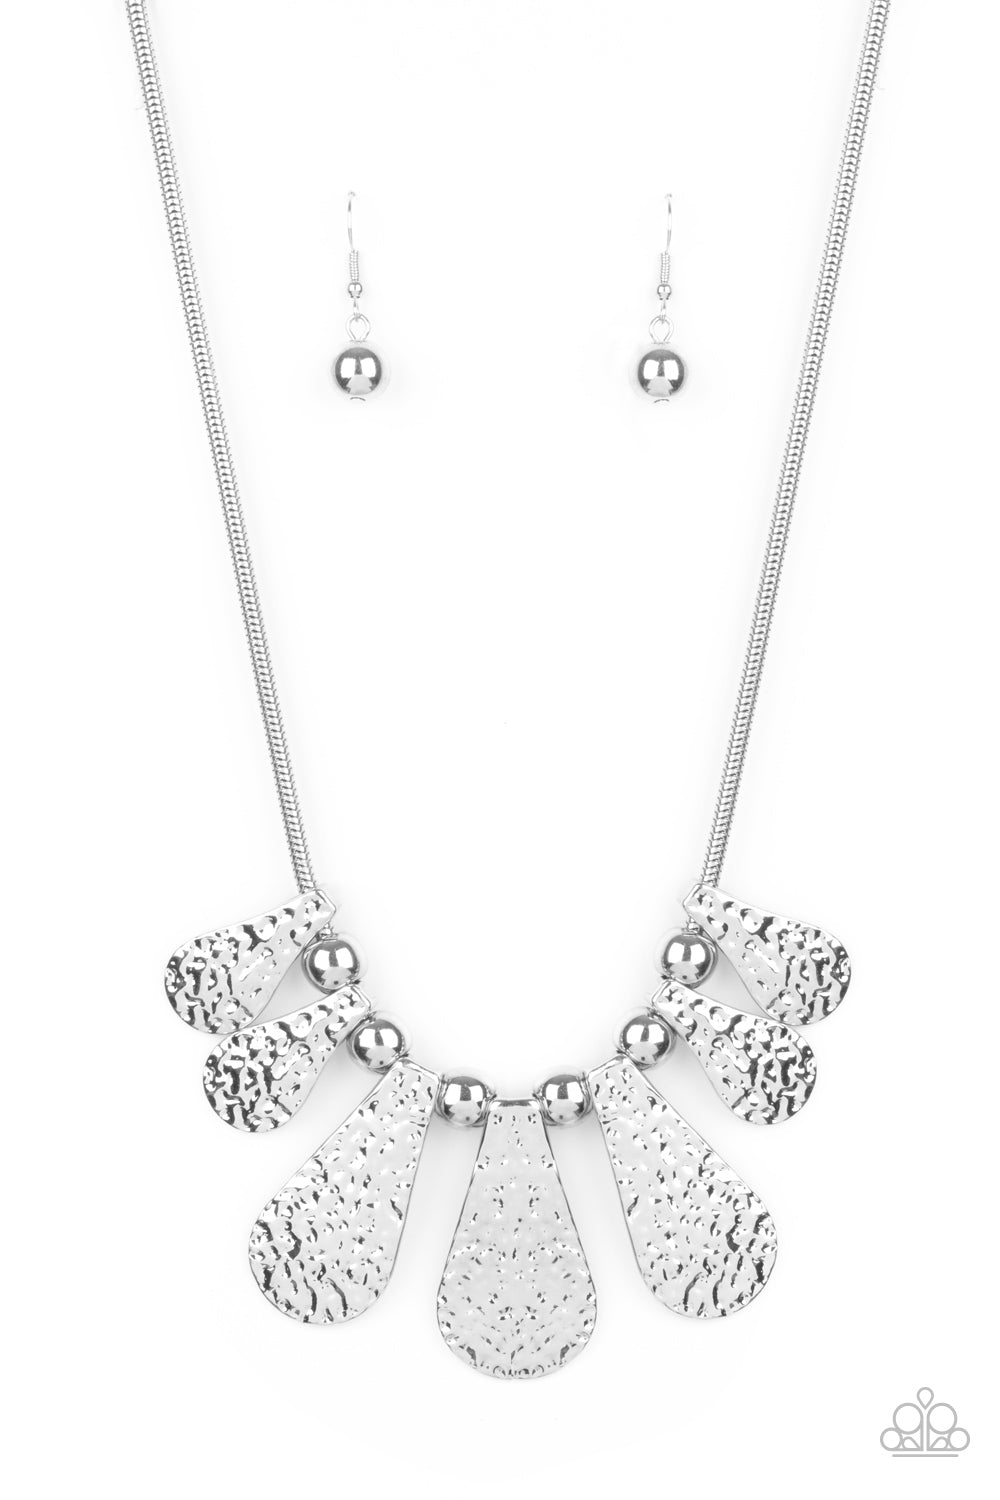 Paparazzi Accessories Gallery Goddess - Silver Necklaces - Lady T Accessories